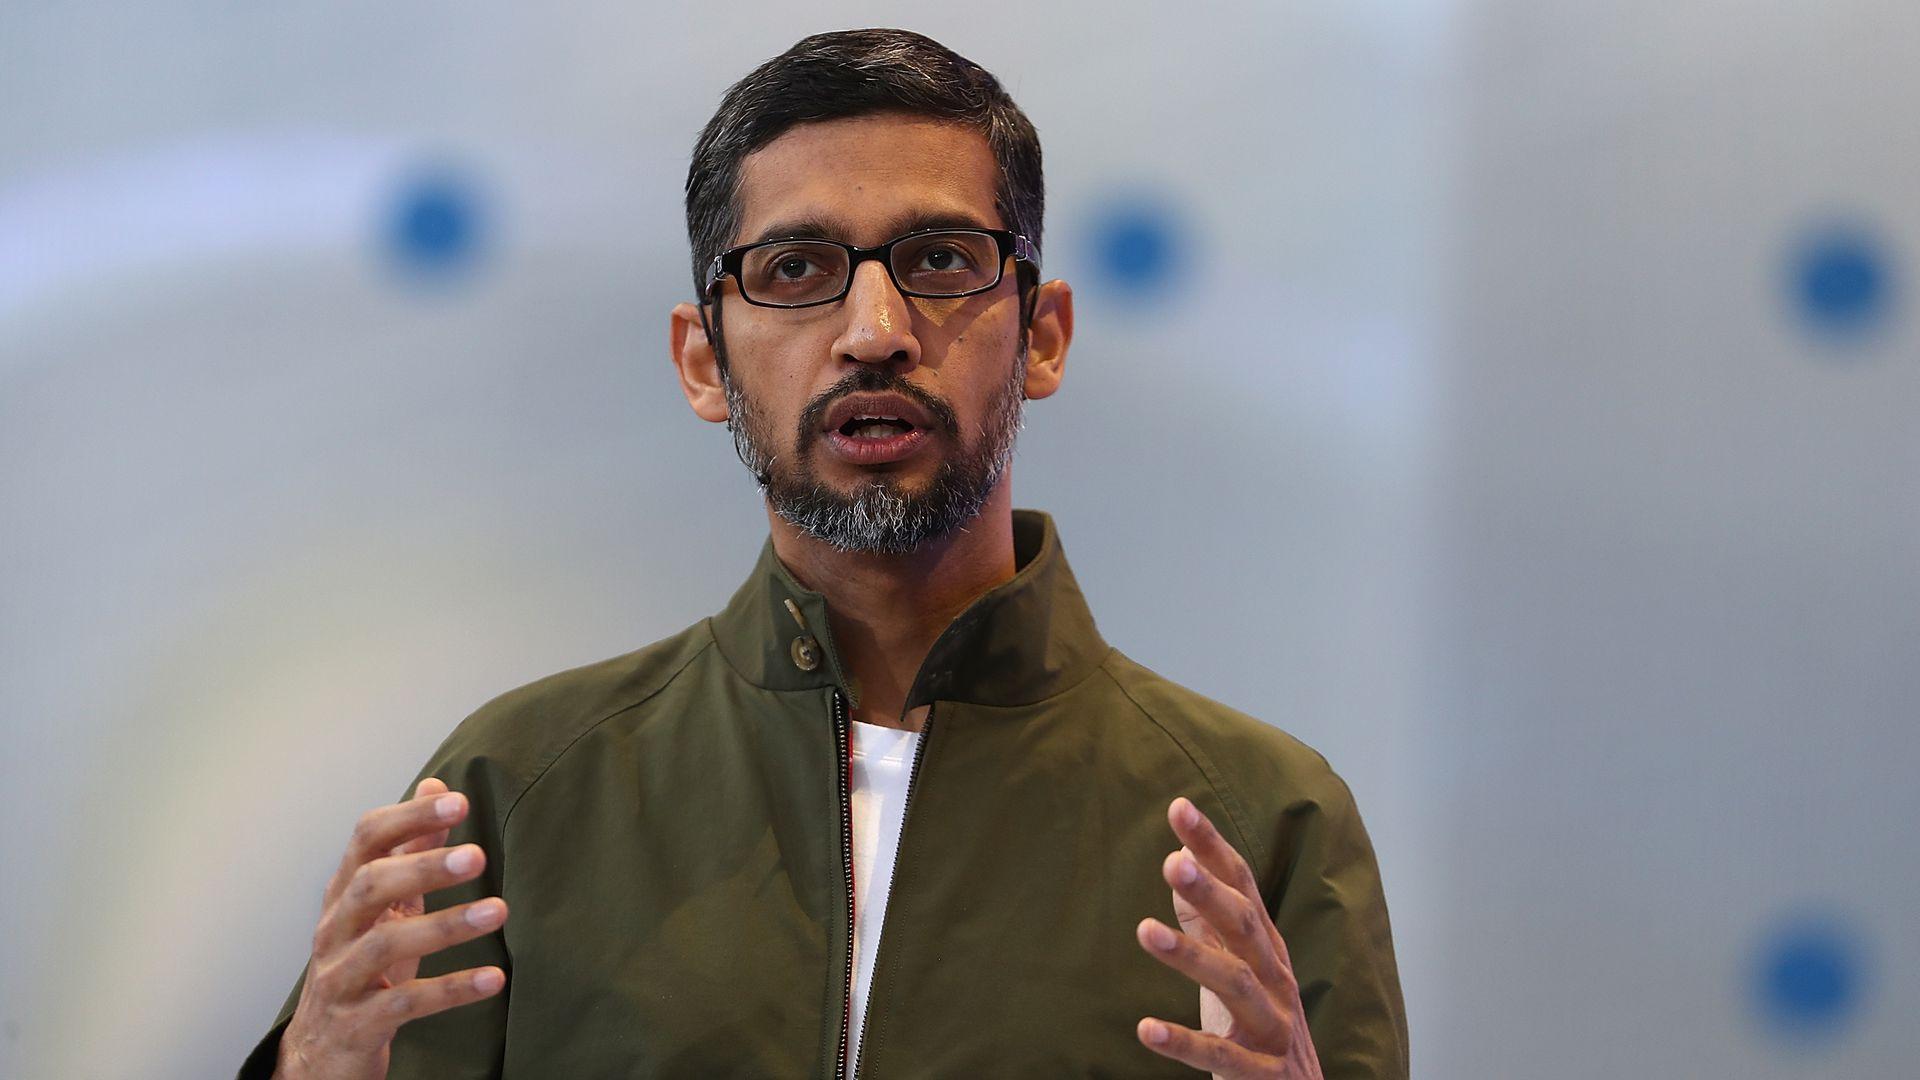 Google CEO: Apology for past harassment issues not enough